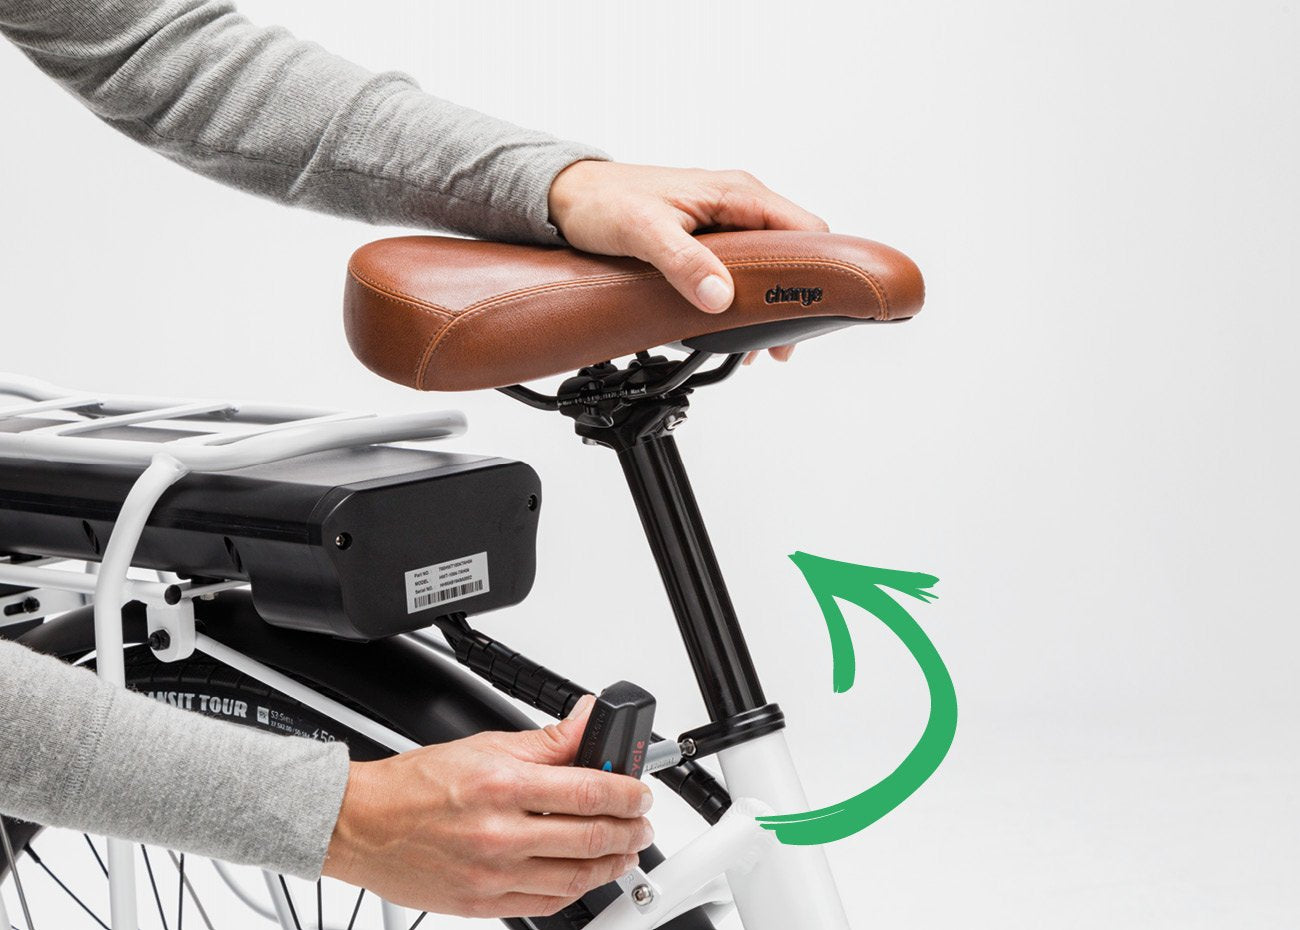 How to loosen electric hybrid bike seat to adjust height